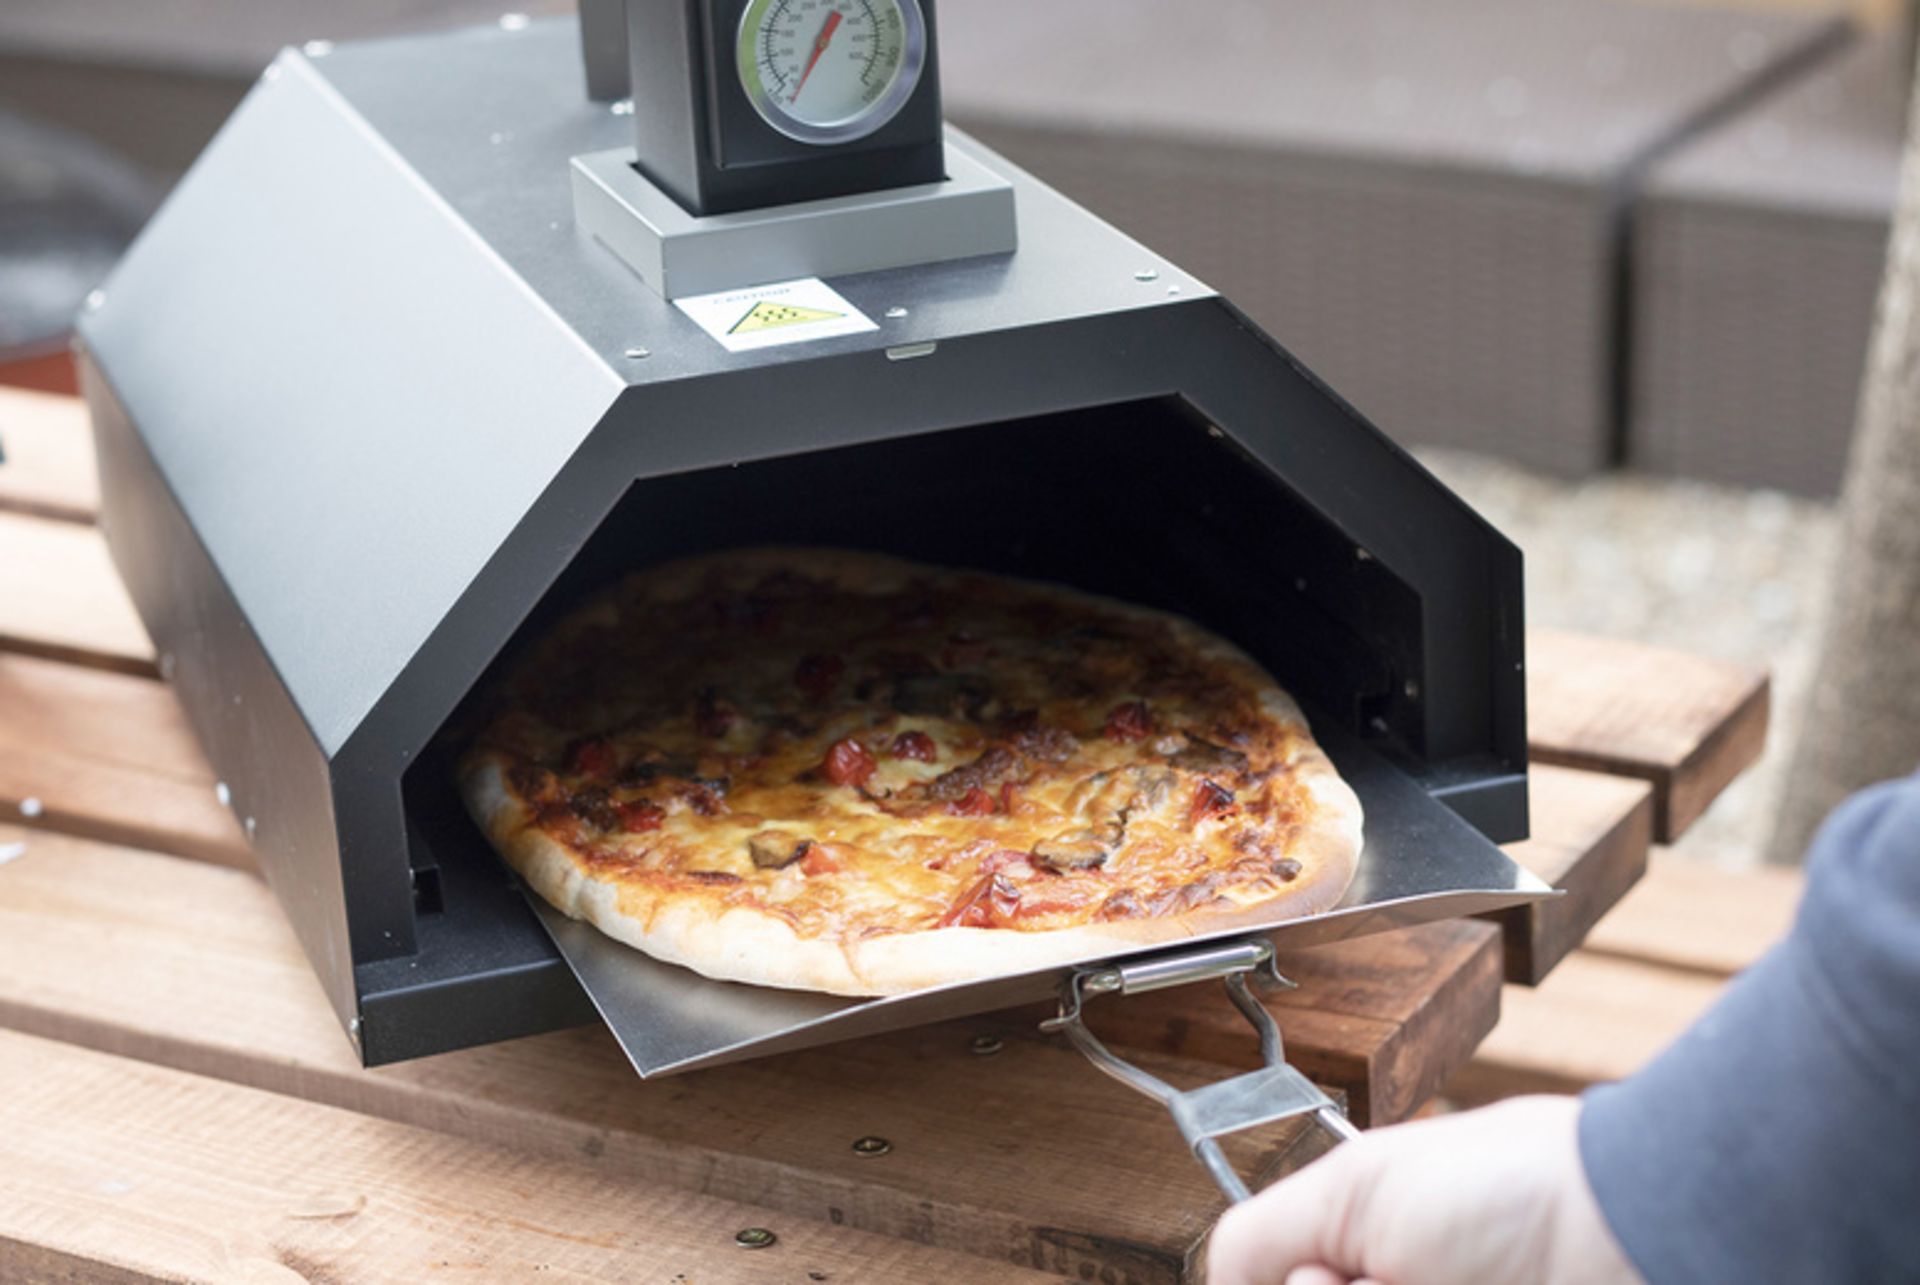 JOBLOT OF 5 X SQUARE PIZZA OVEN - WITH PADDLE AND COVER